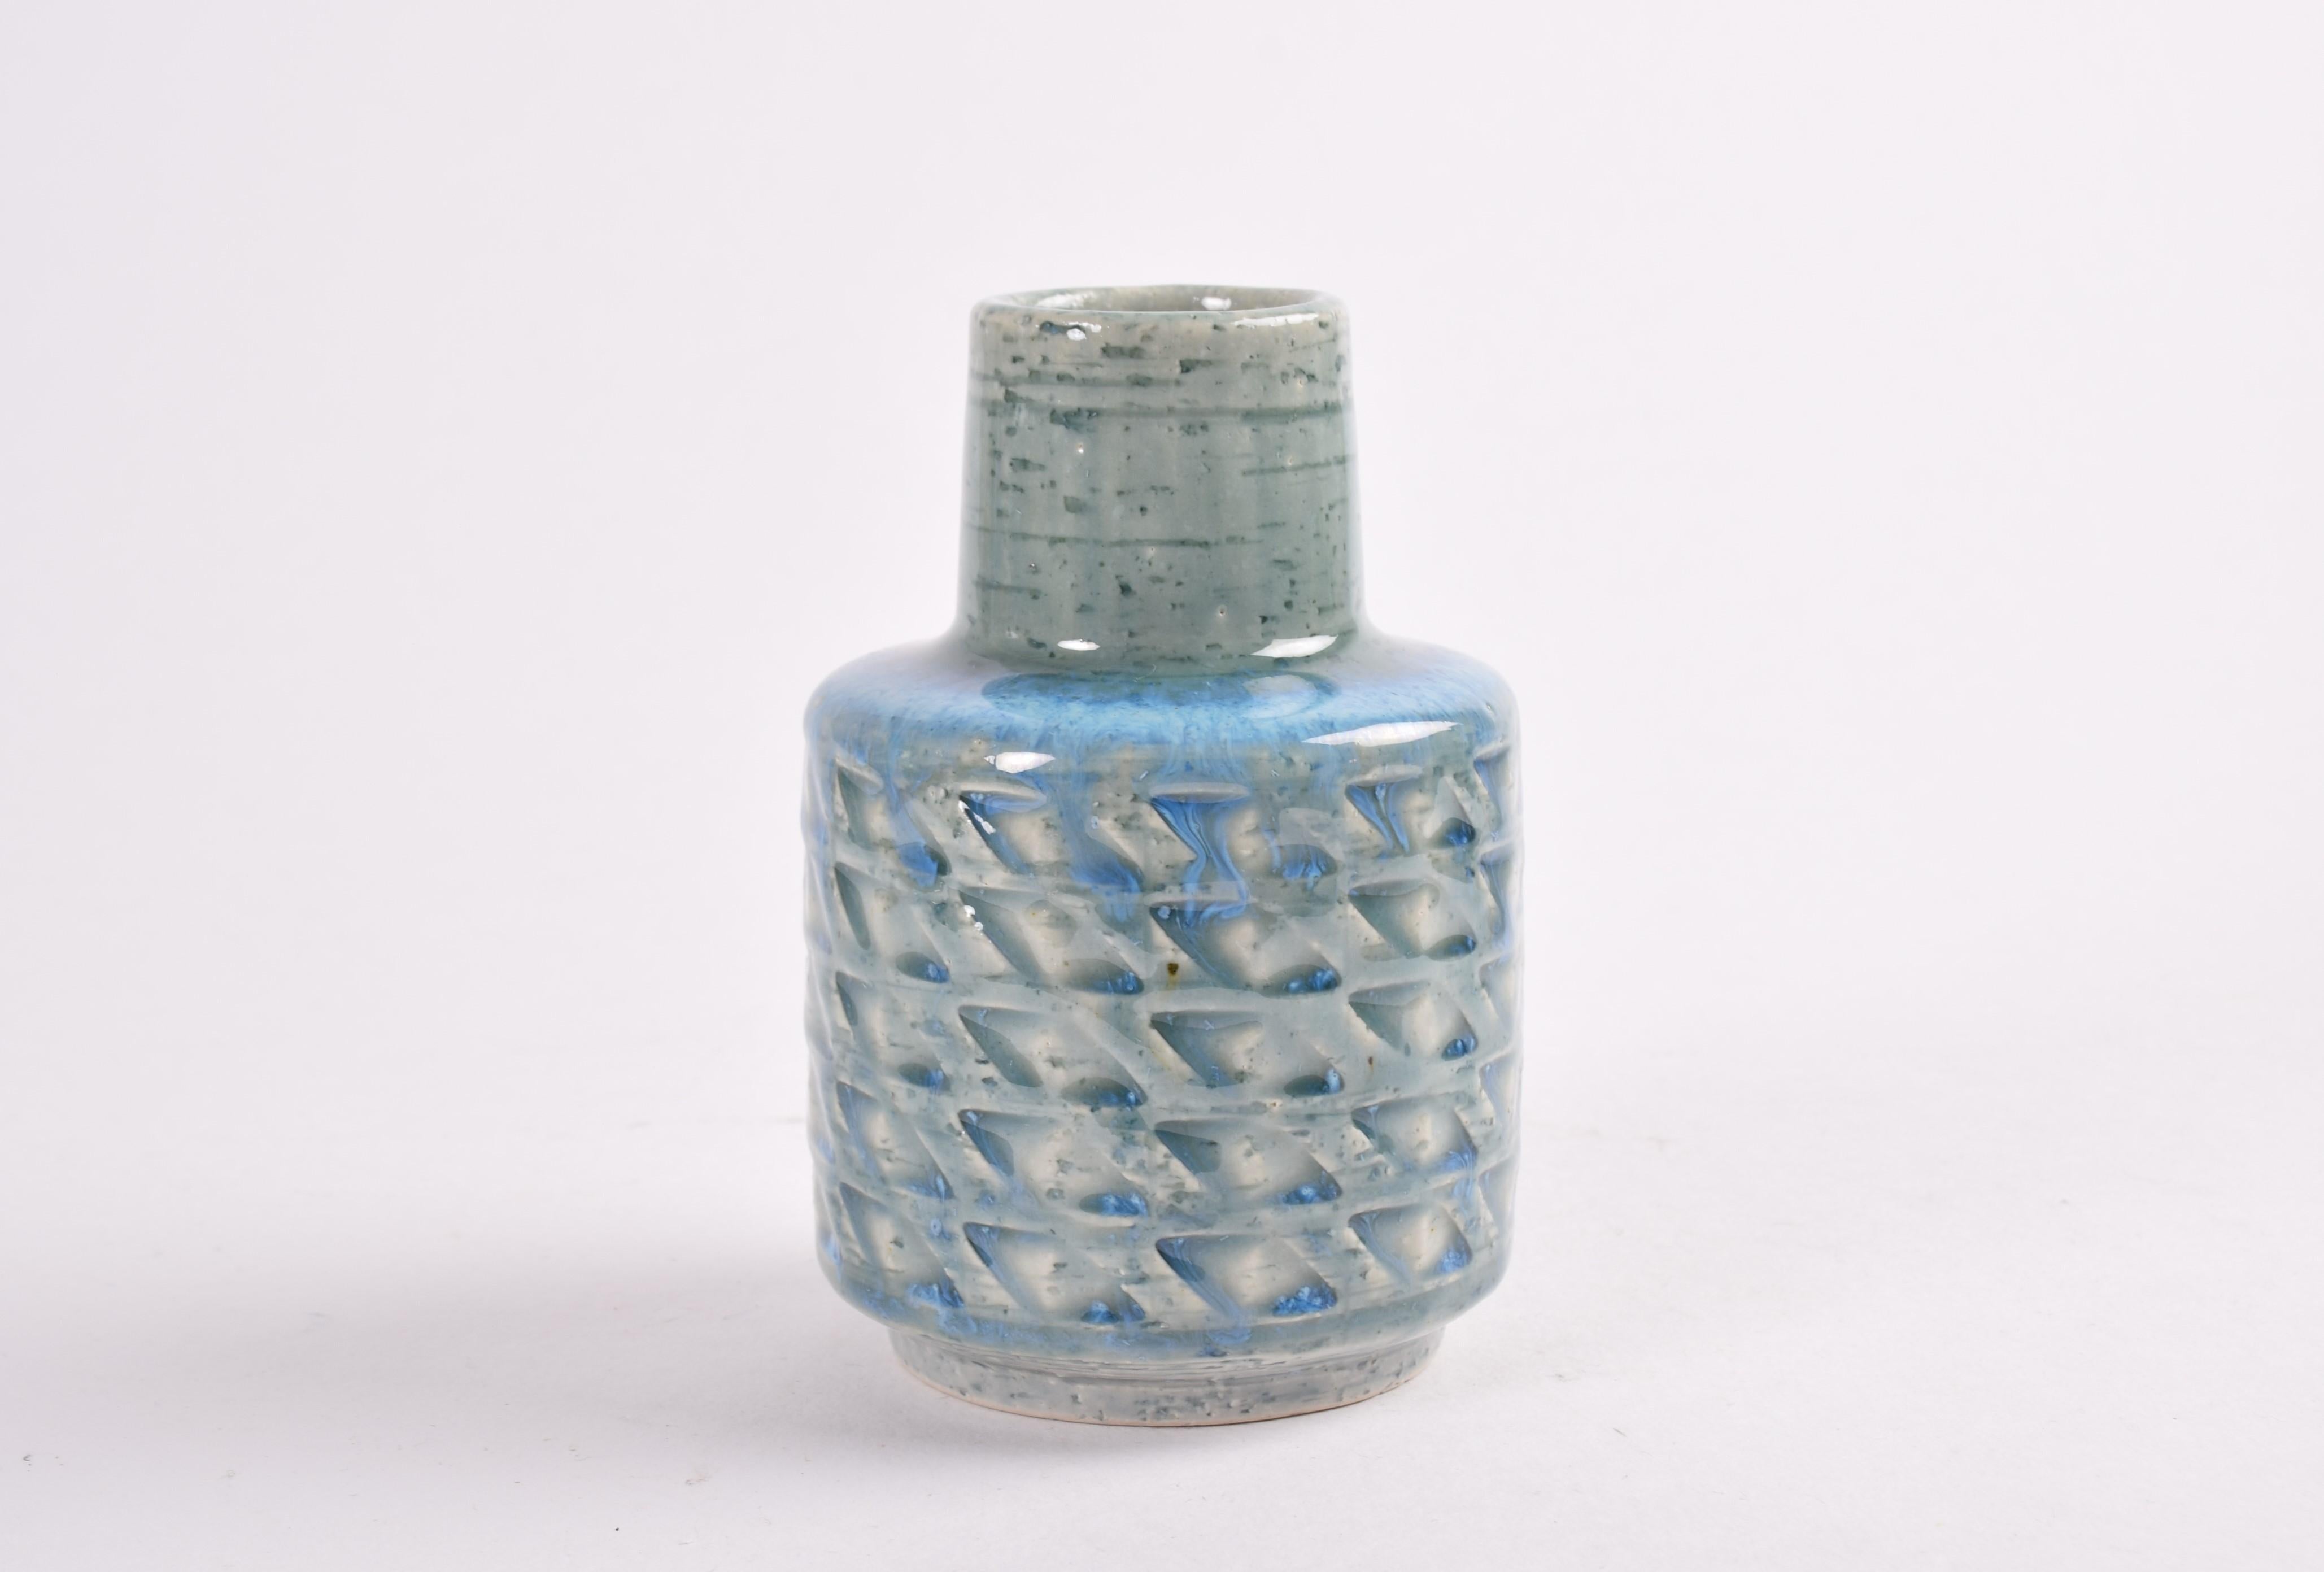 Ceramic vase by Per Linnemann-Schmidt for Palshus Denmark. Made in the 1960s.
It is made with chamotte clay which gives a rough and vivid surface. It has a shiny bright blue glaze over a textured zig zag decor.

Fully marked on bottom.